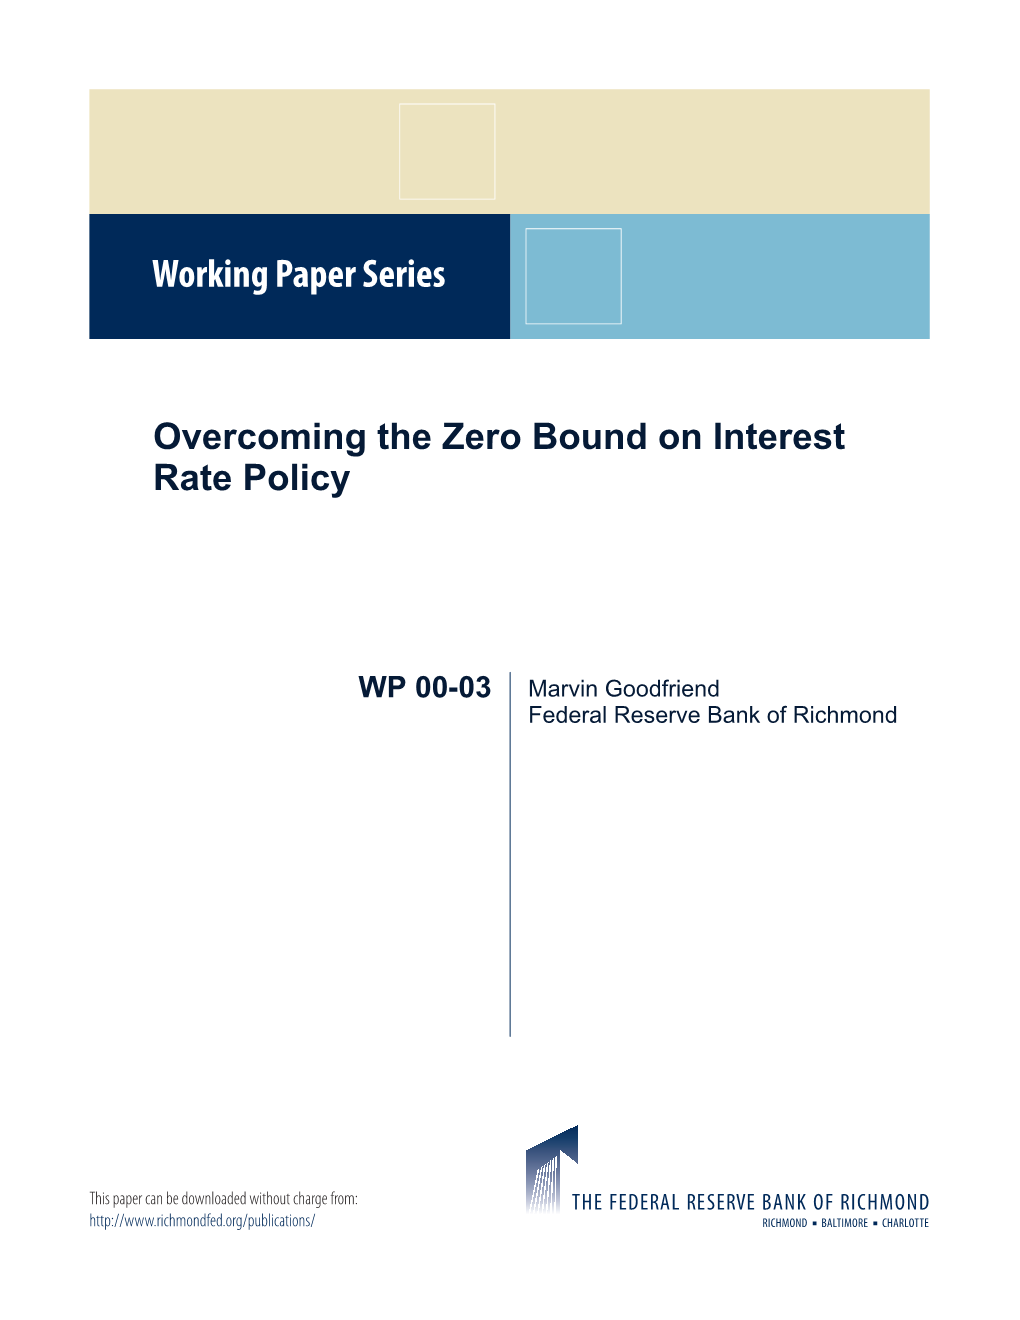 Overcoming the Zero Bound on Interest Rate Policy